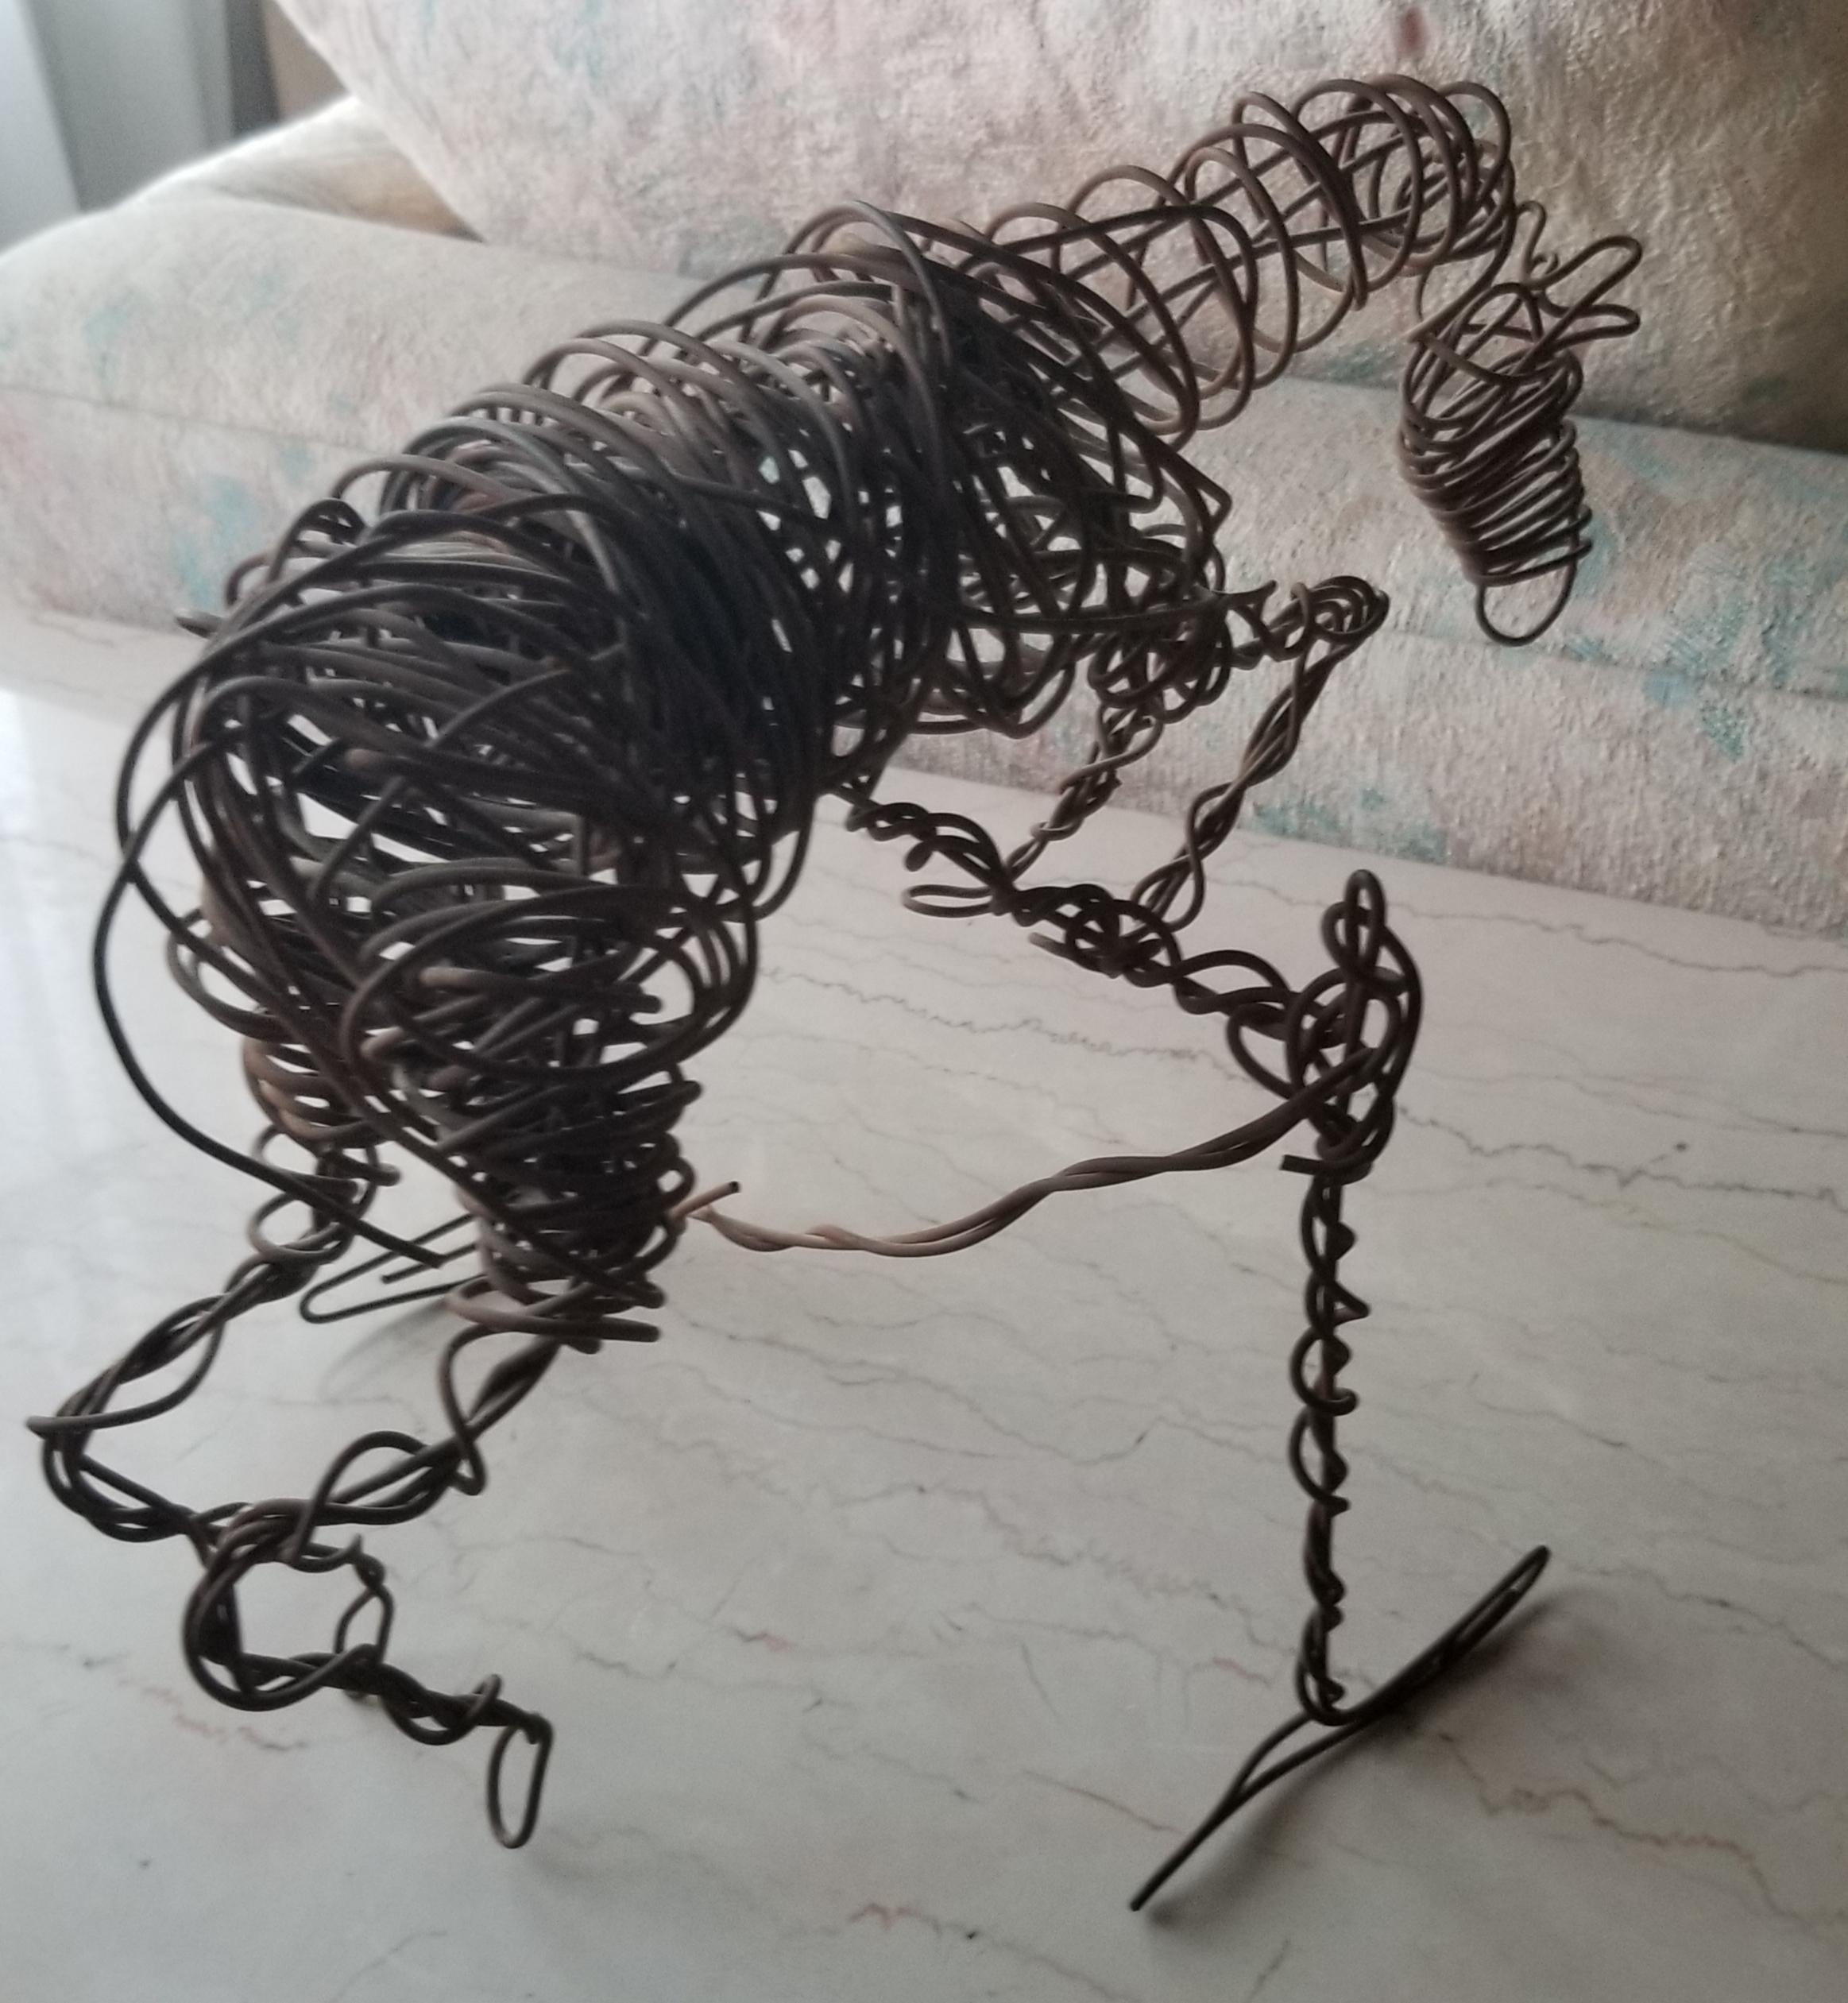 Presenting:
Fabulous wire Metal Art horse jumper table sculpture abstract modern brutalism
Unmarked.
Measures: 14 inches L x 8 Tall x 8 Deep
Original preowned unrestored vintage item condition.
Review images please.

 